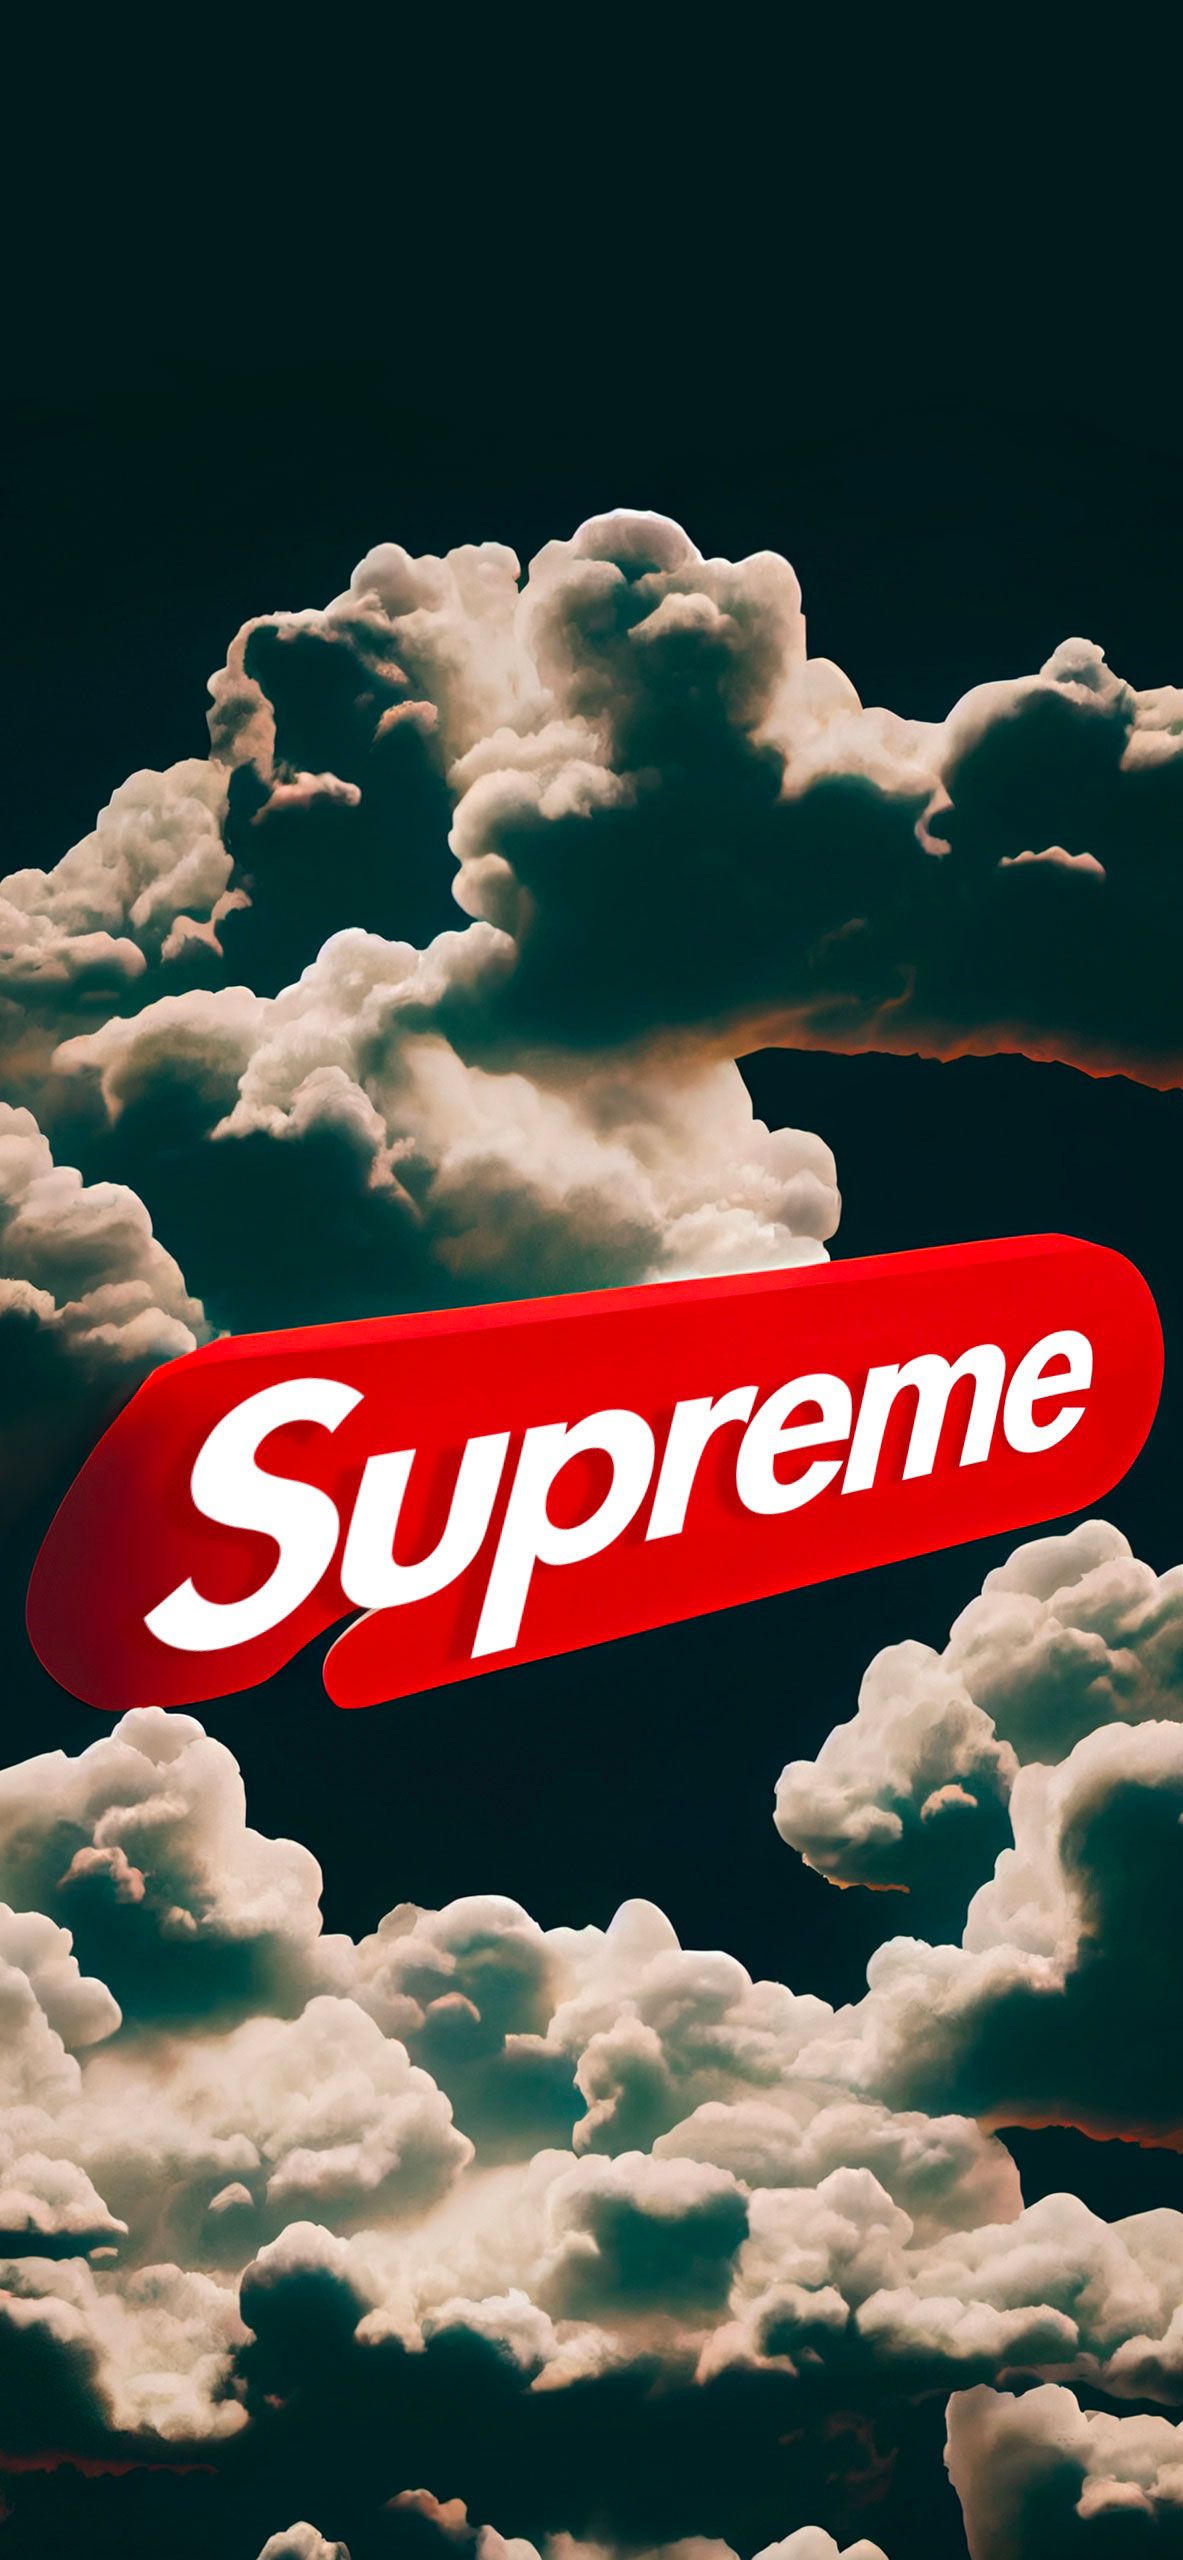 A supreme logo is shown in the clouds - Supreme